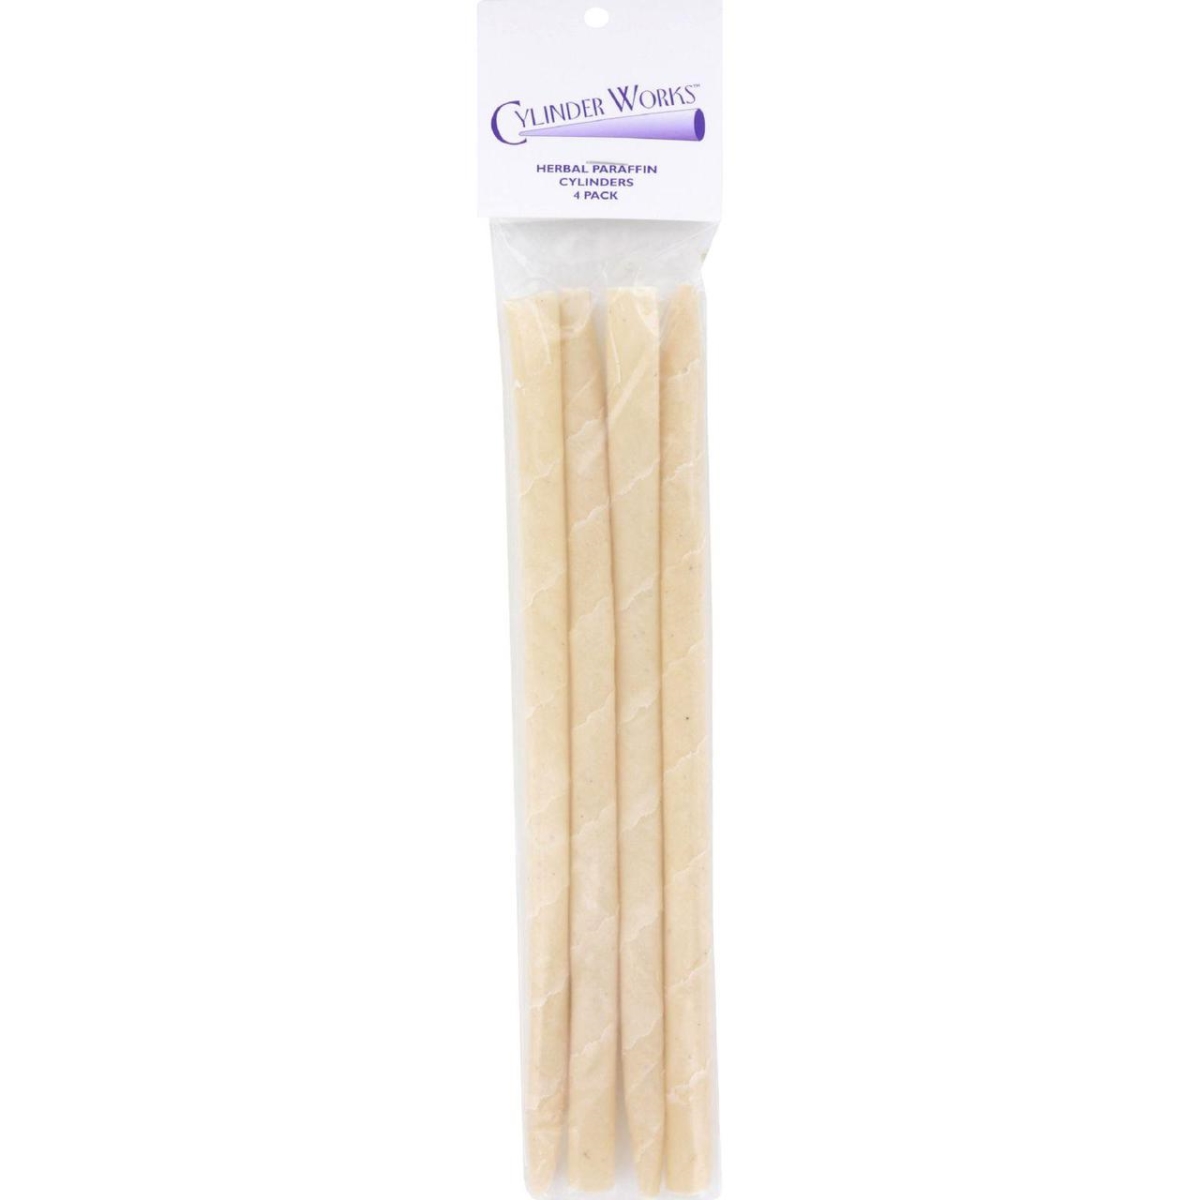 Hg0409995 Herbal Paraffin Ear Candles - Pack Of 4